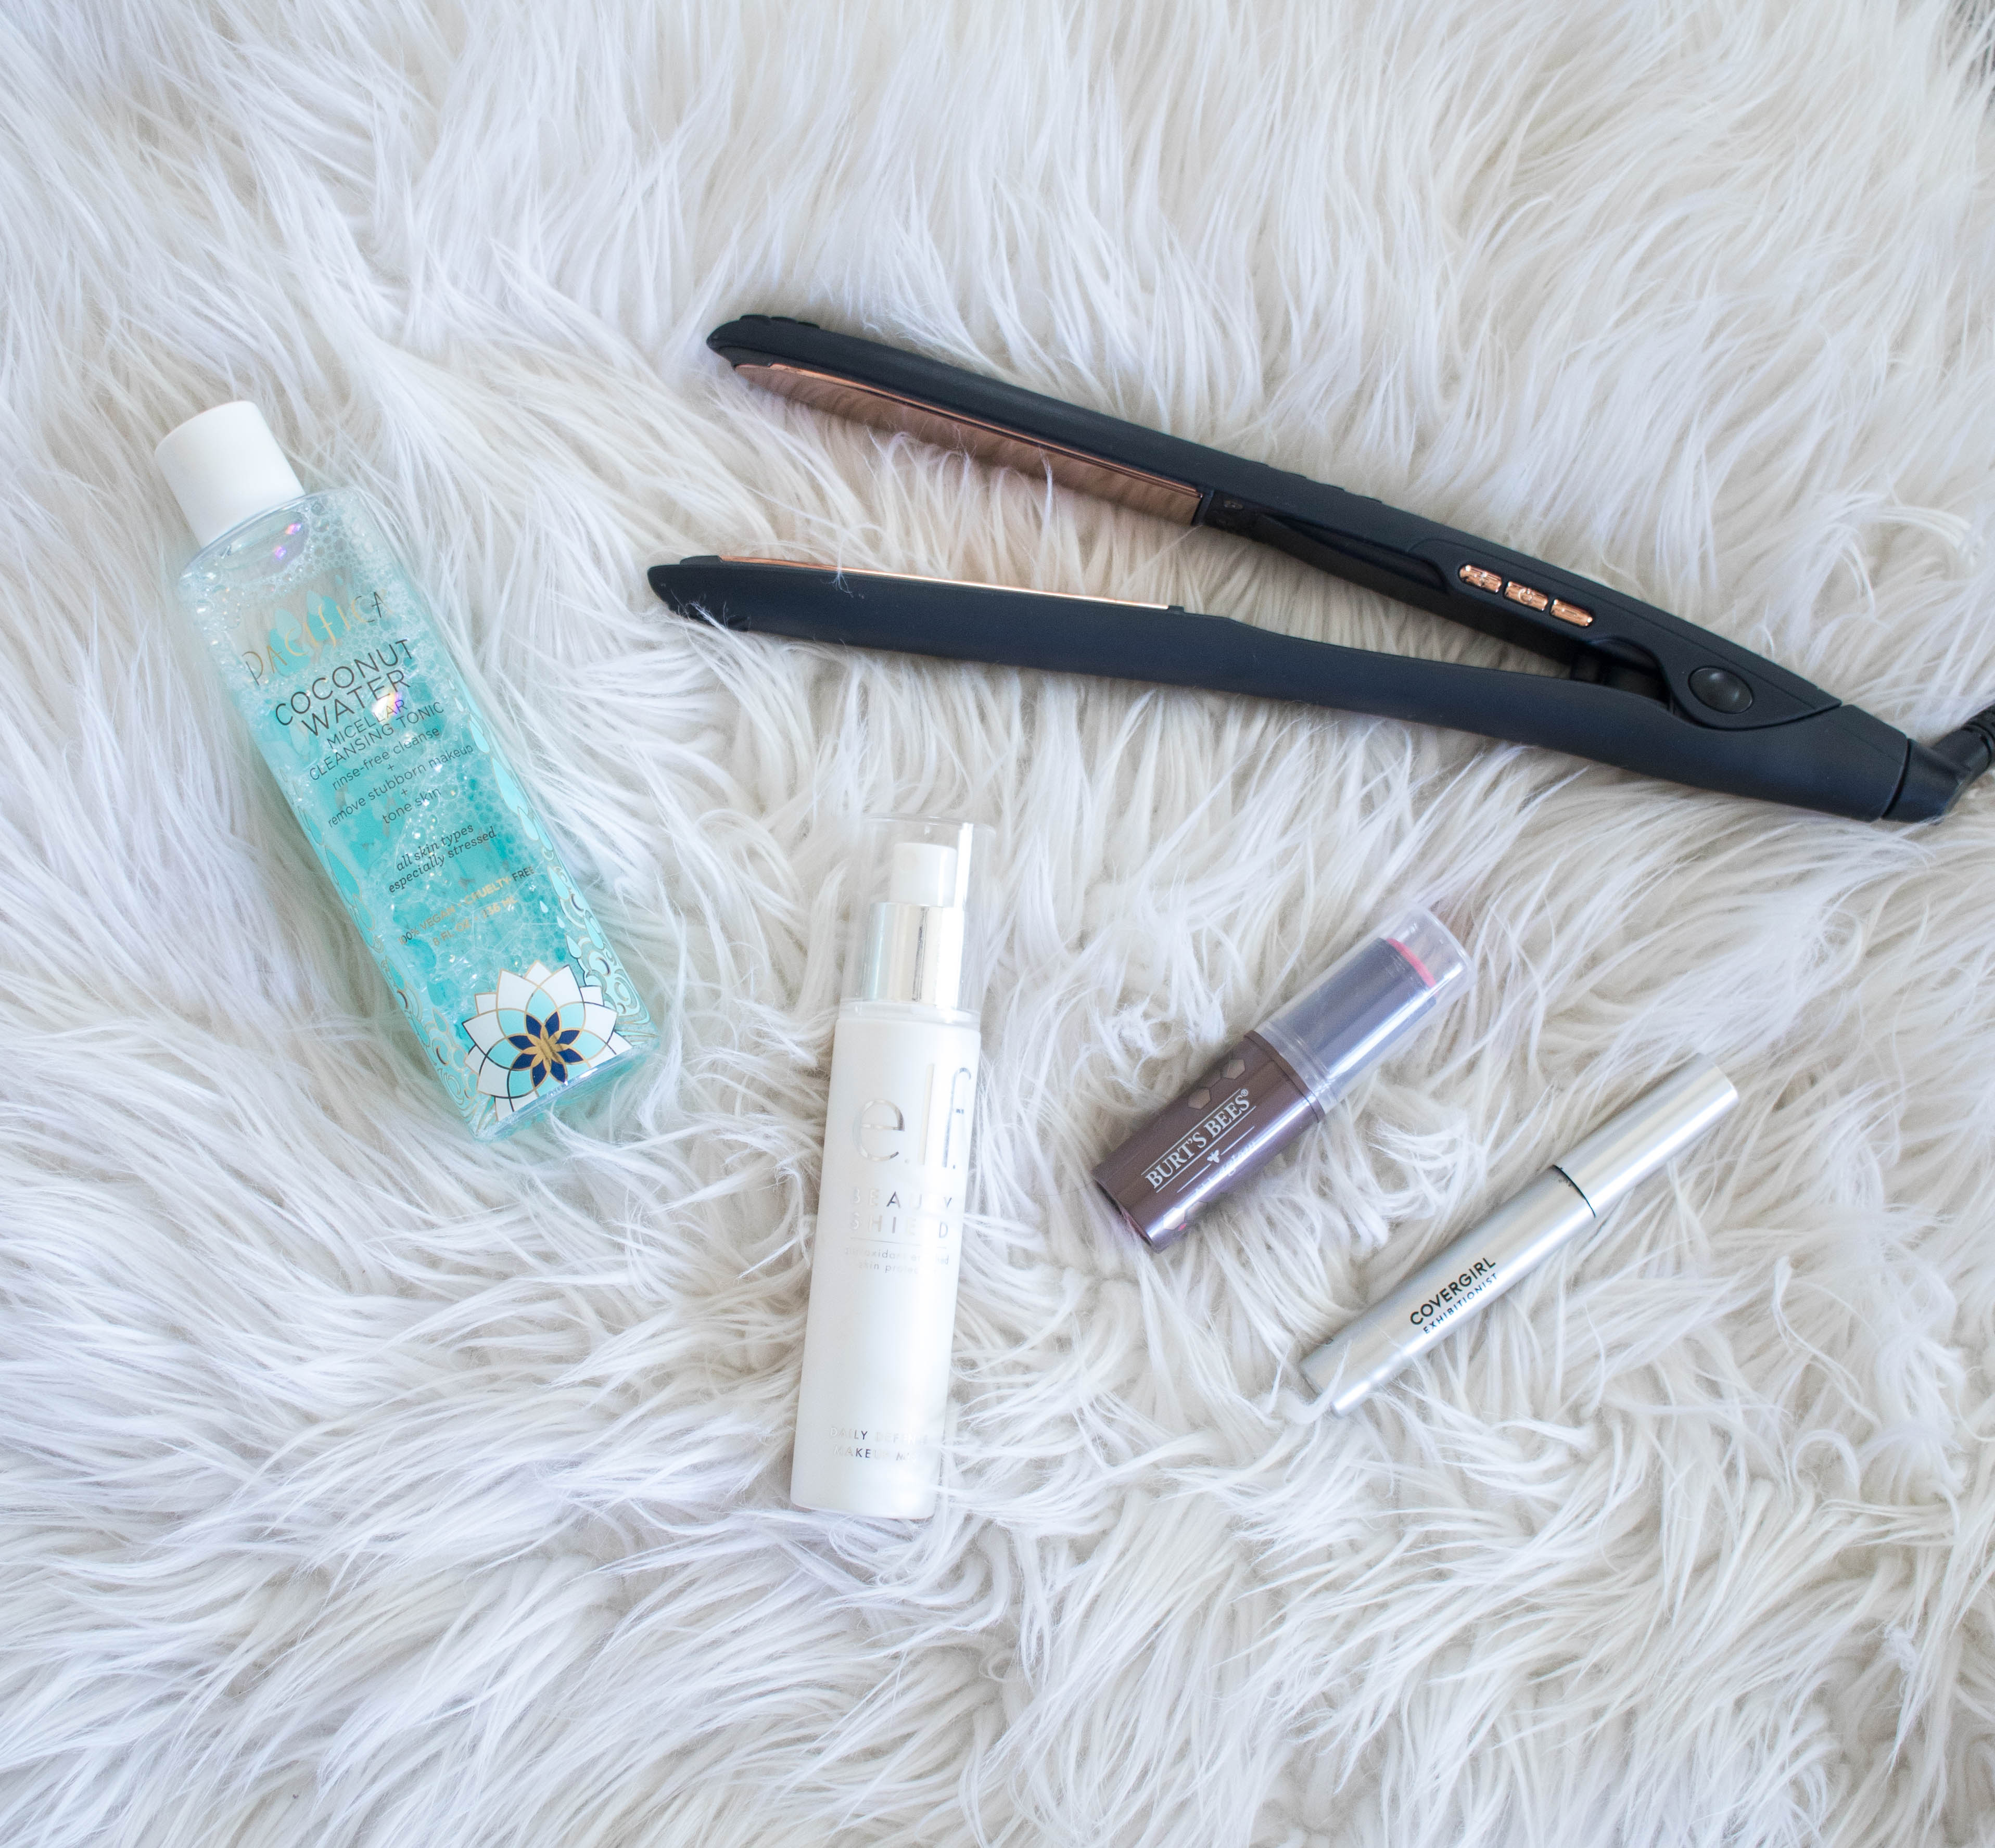 April beauty hits and misses #beautyproducts #beautyproductreview #makeup